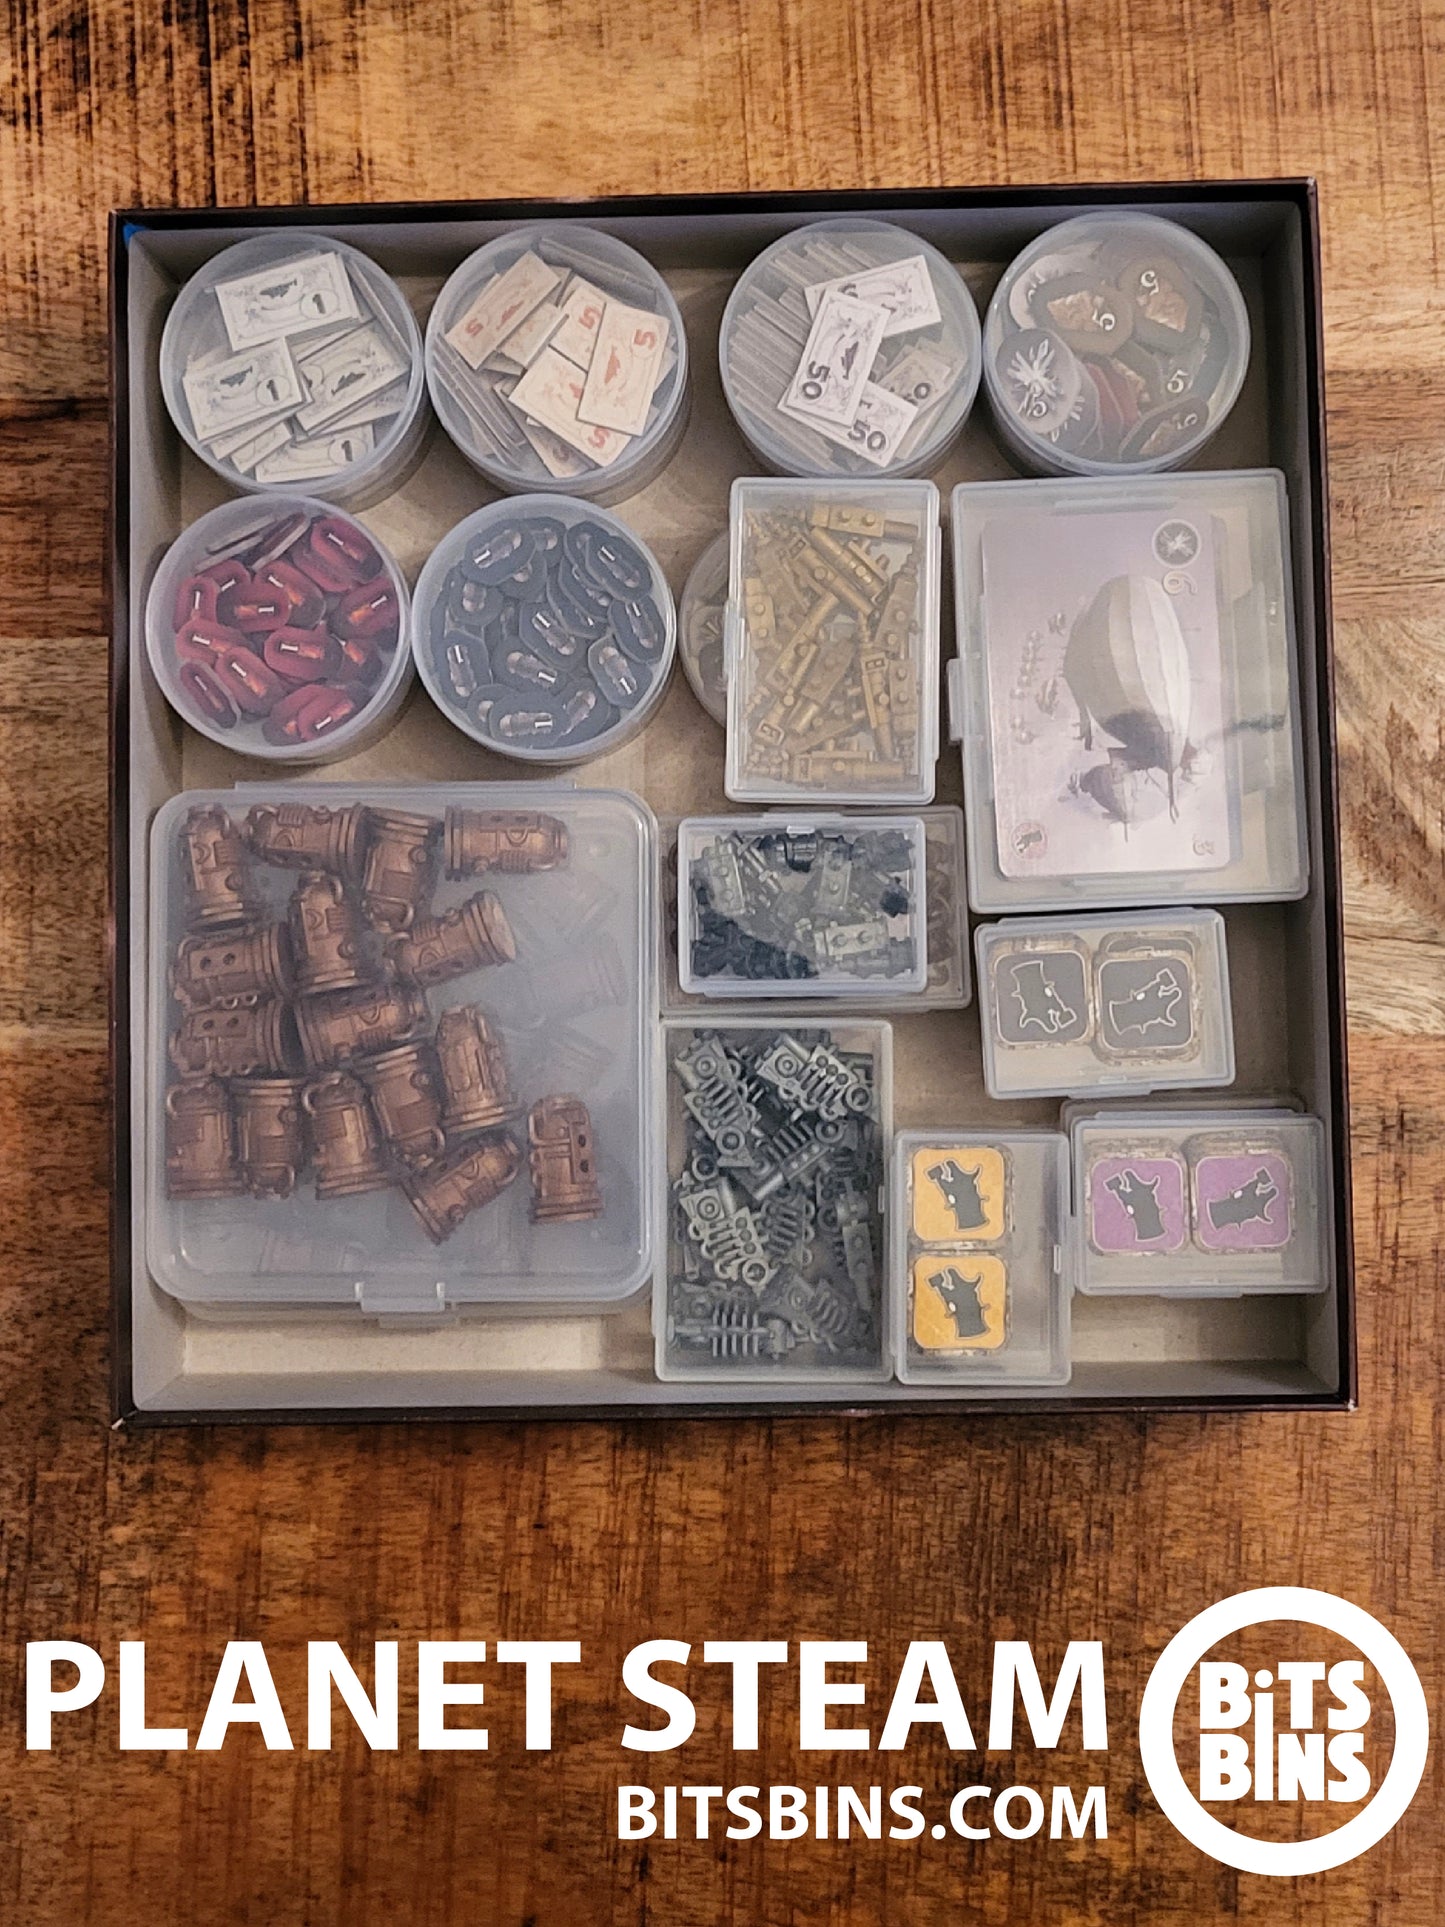 RECOMMENDED Planet Steam BitsBins - 13 Pods, 7 Minis, 2 Originals, 1 XL, 2 Card Boxes, 2 Flats